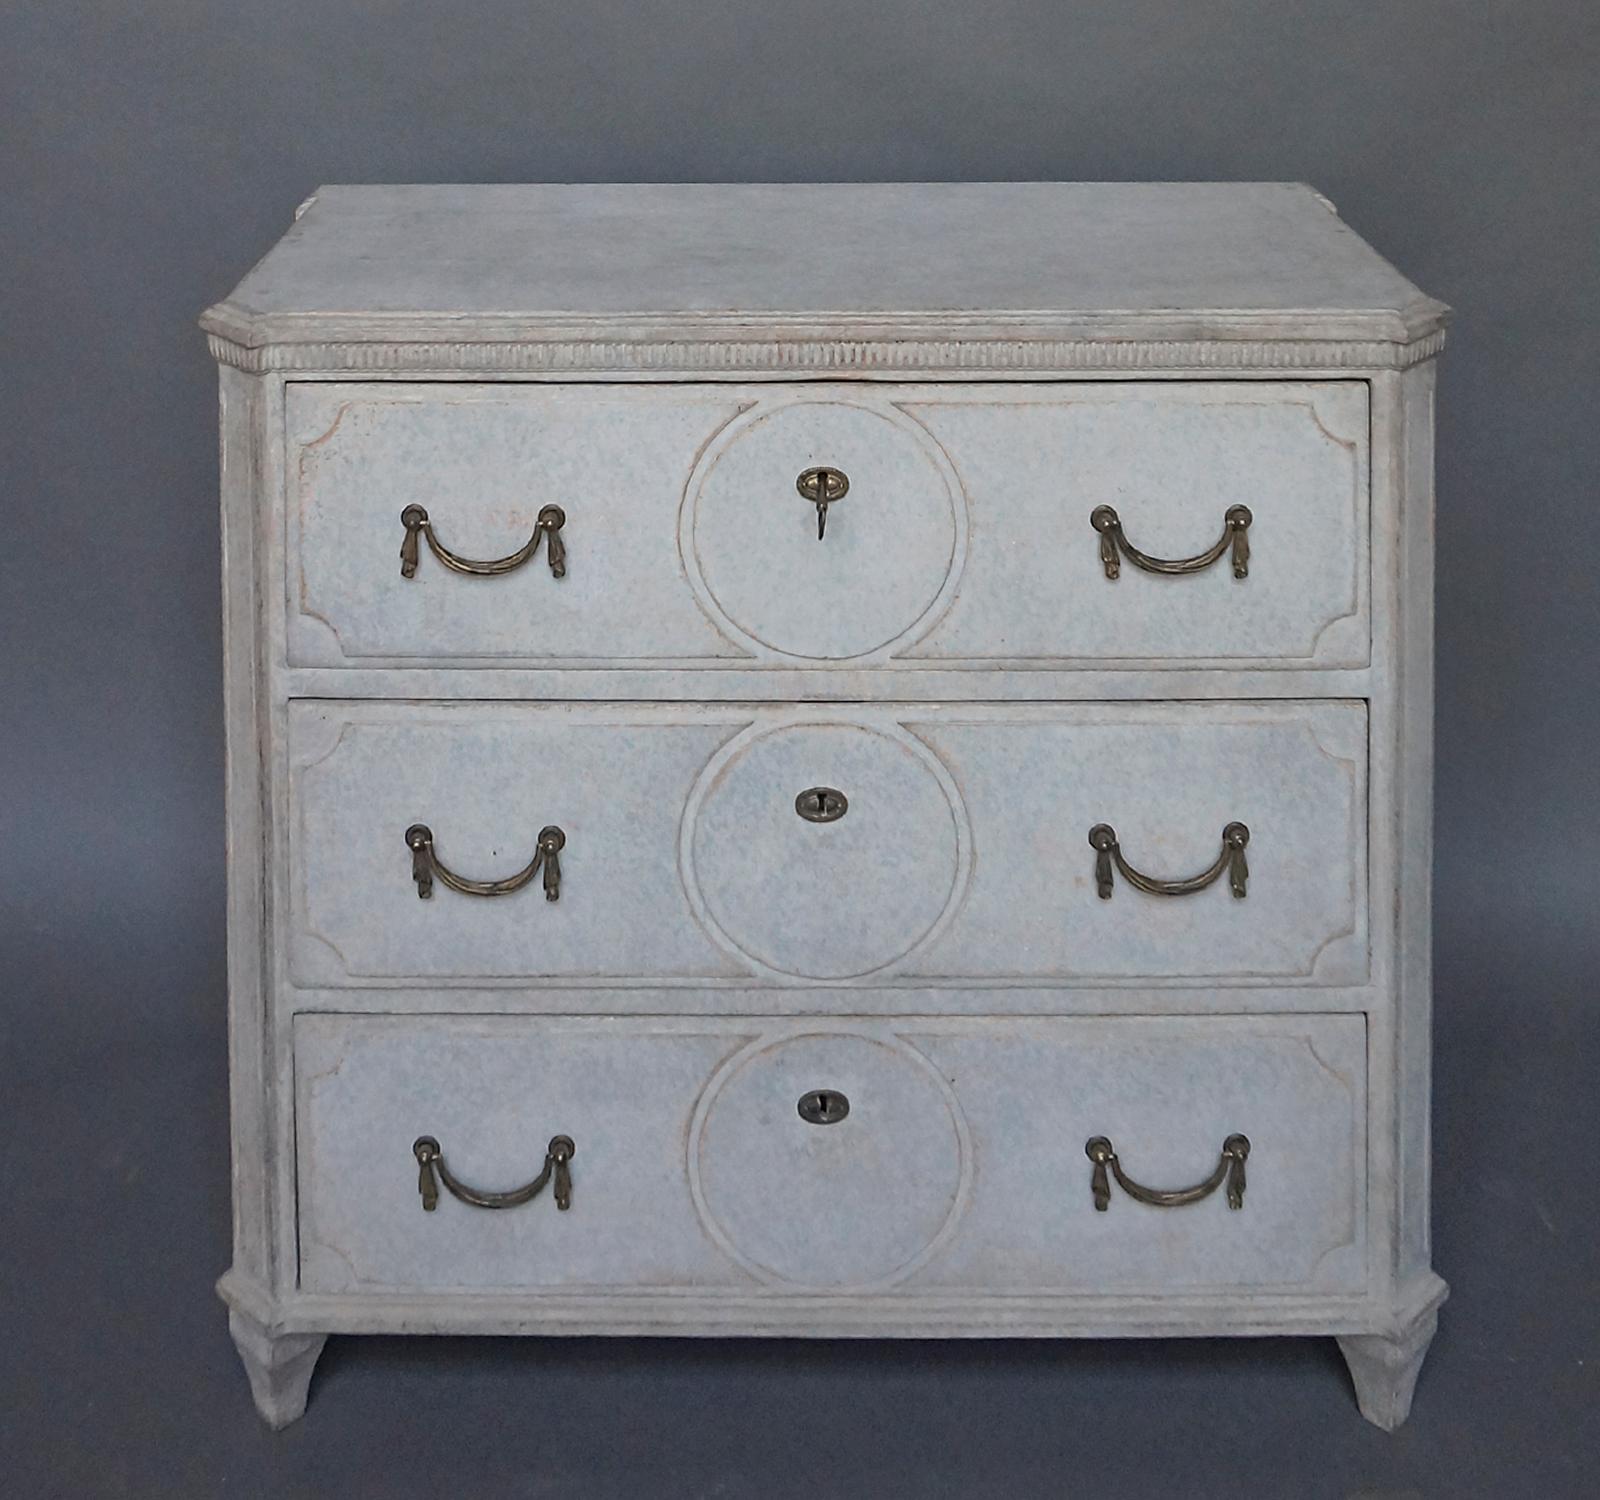 Neoclassical chest of drawers, Sweden circa 1890, with shaped panels in each drawer front, interrupted with incised circles. Shaped top with dentil detail, canted corners, and brass handles with swagged ends.